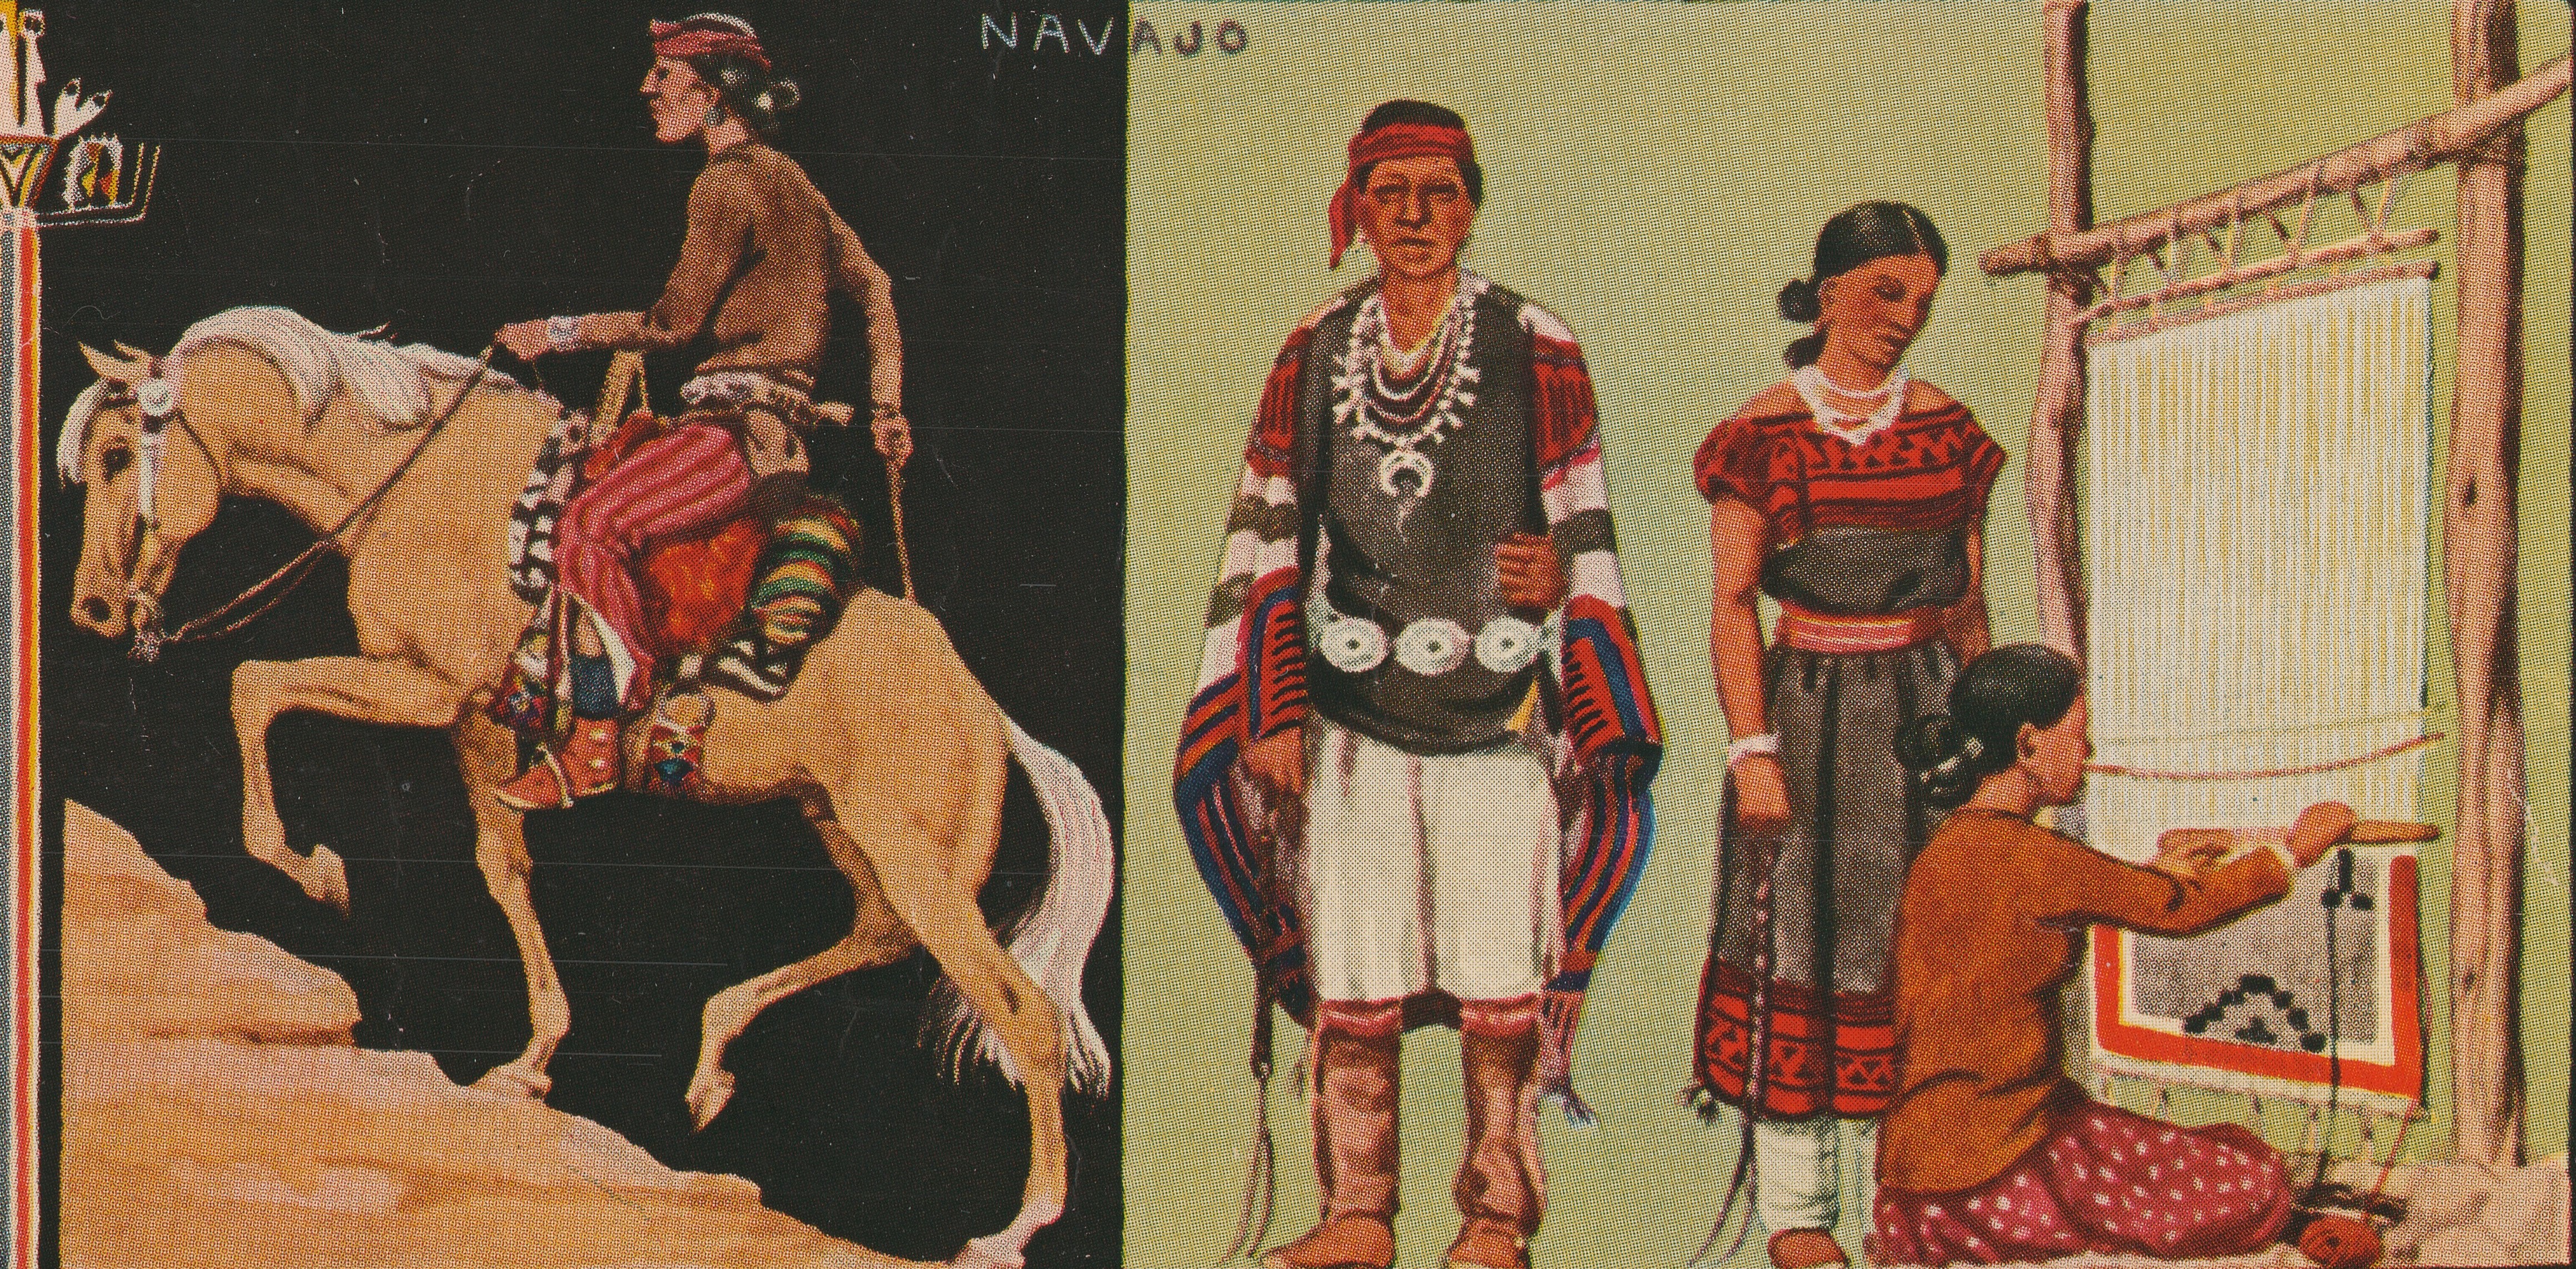 Artistic depiction of Native American tribes in traditional dress.